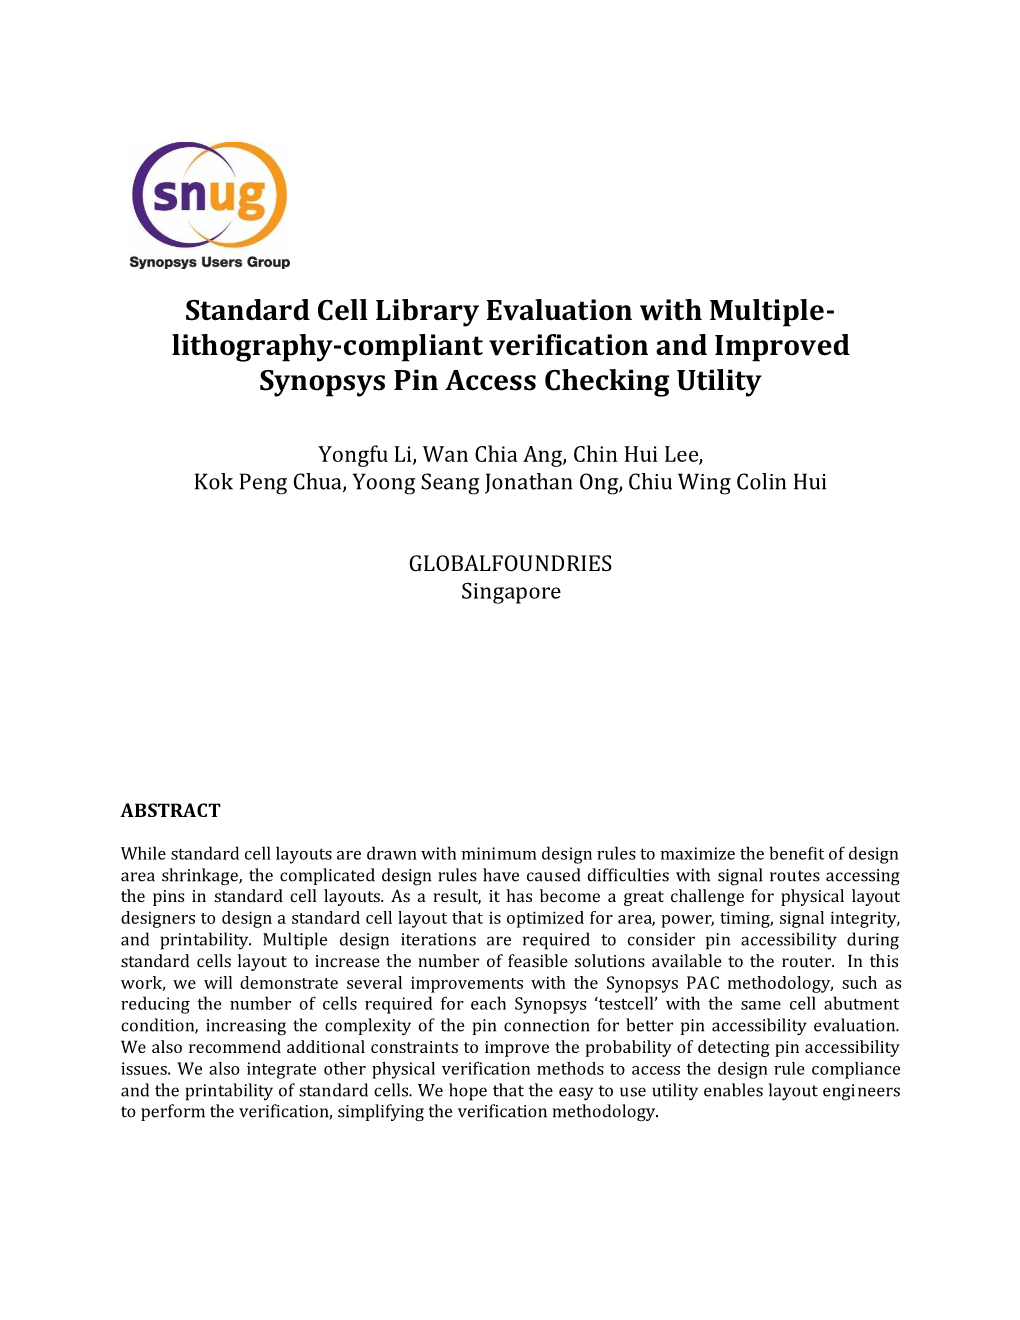 Standard Cell Library Evaluation with Multiple- Lithography-Compliant Verification and Improved Synopsys Pin Access Checking Utility